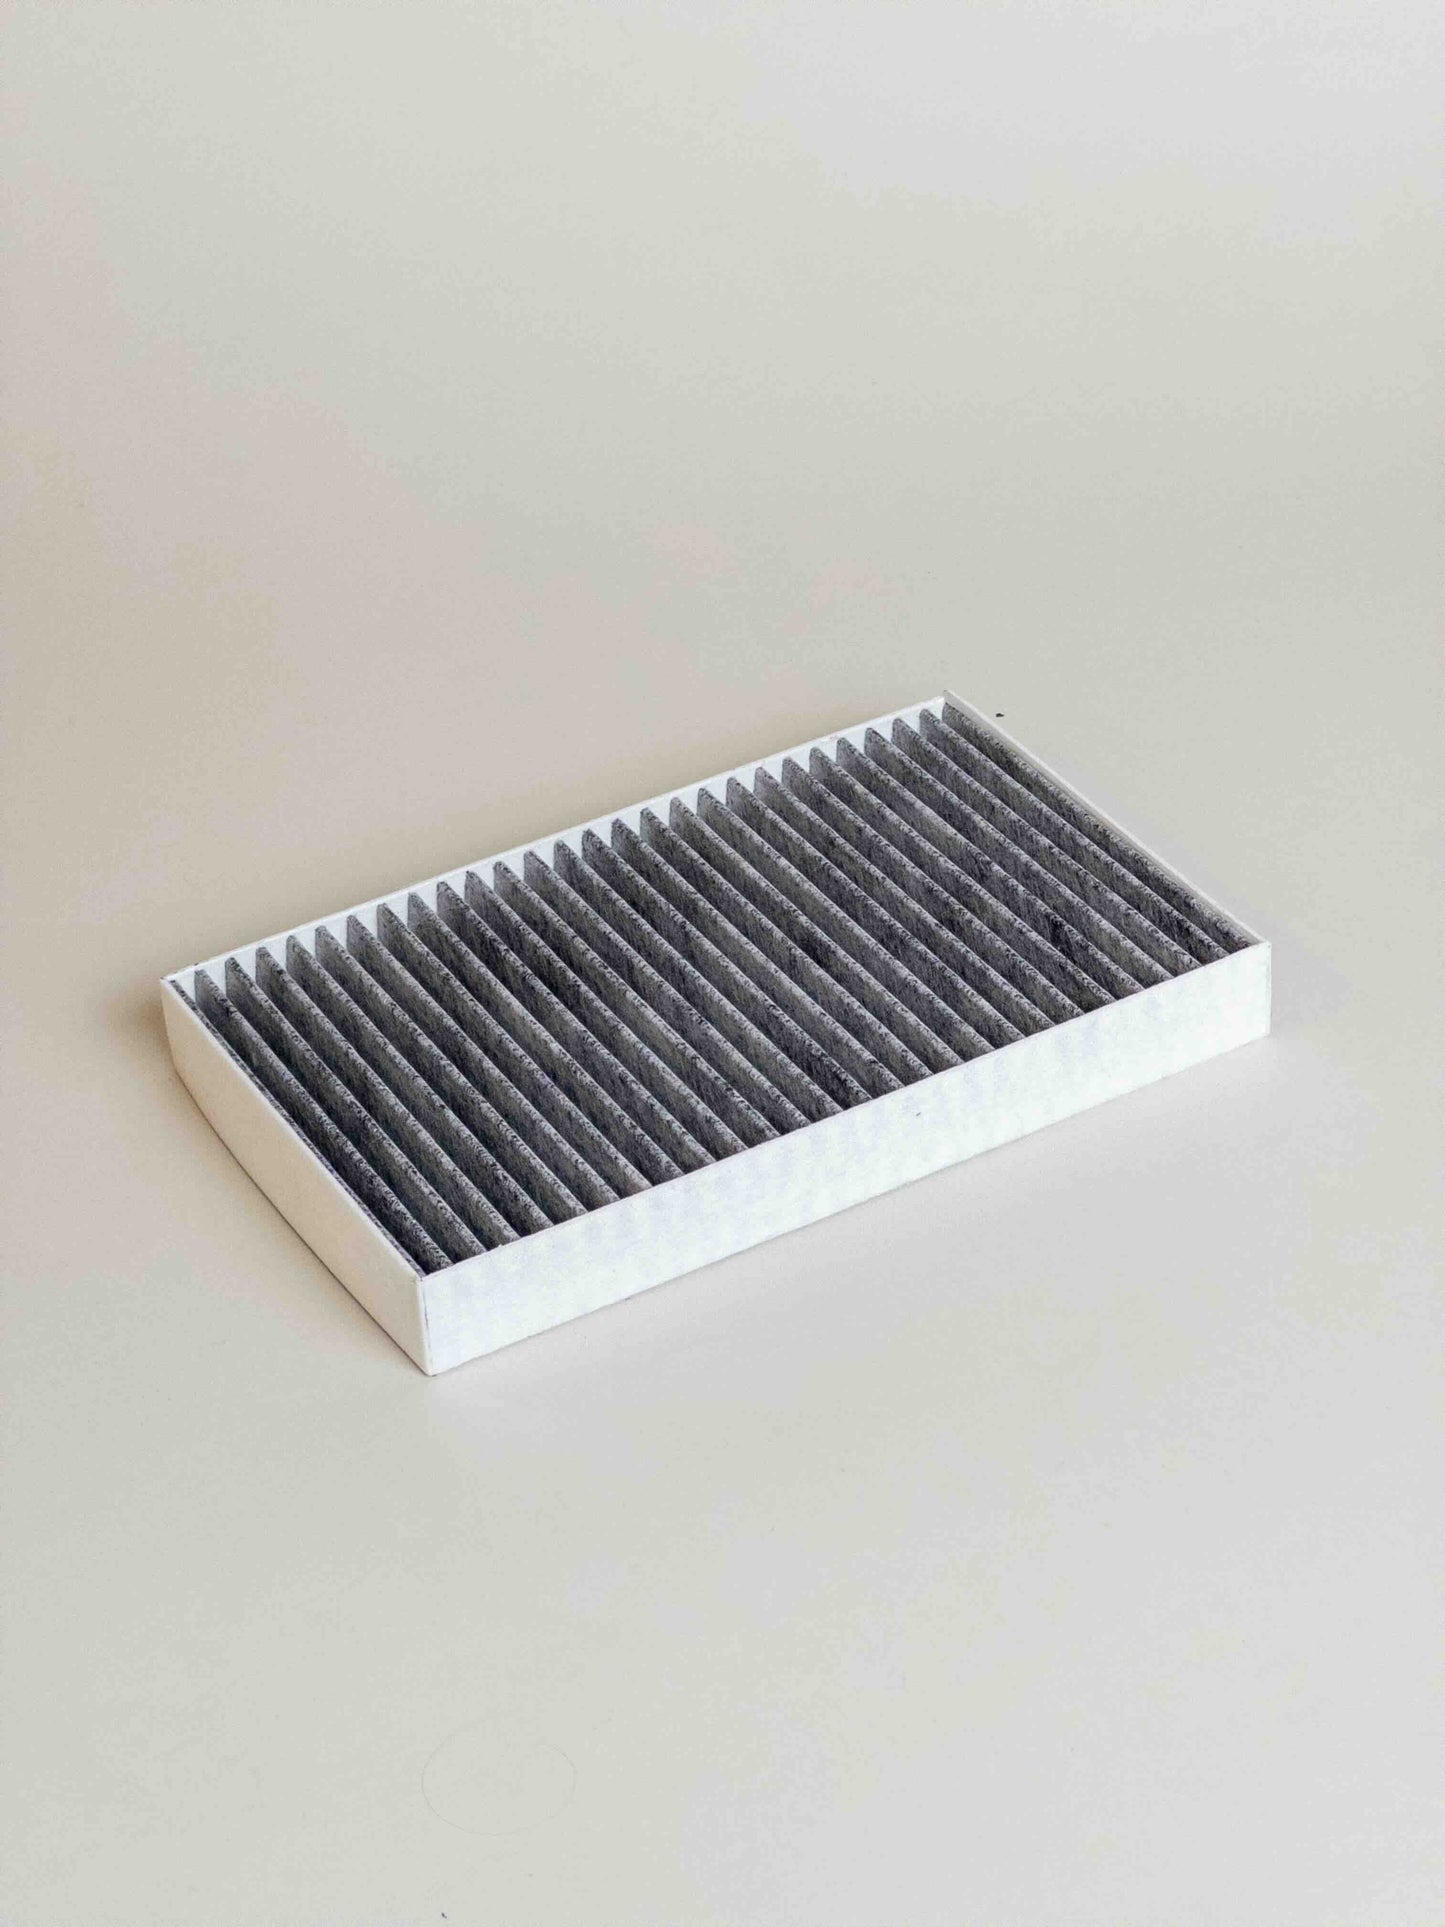 Model S cabin filter 2012 and later